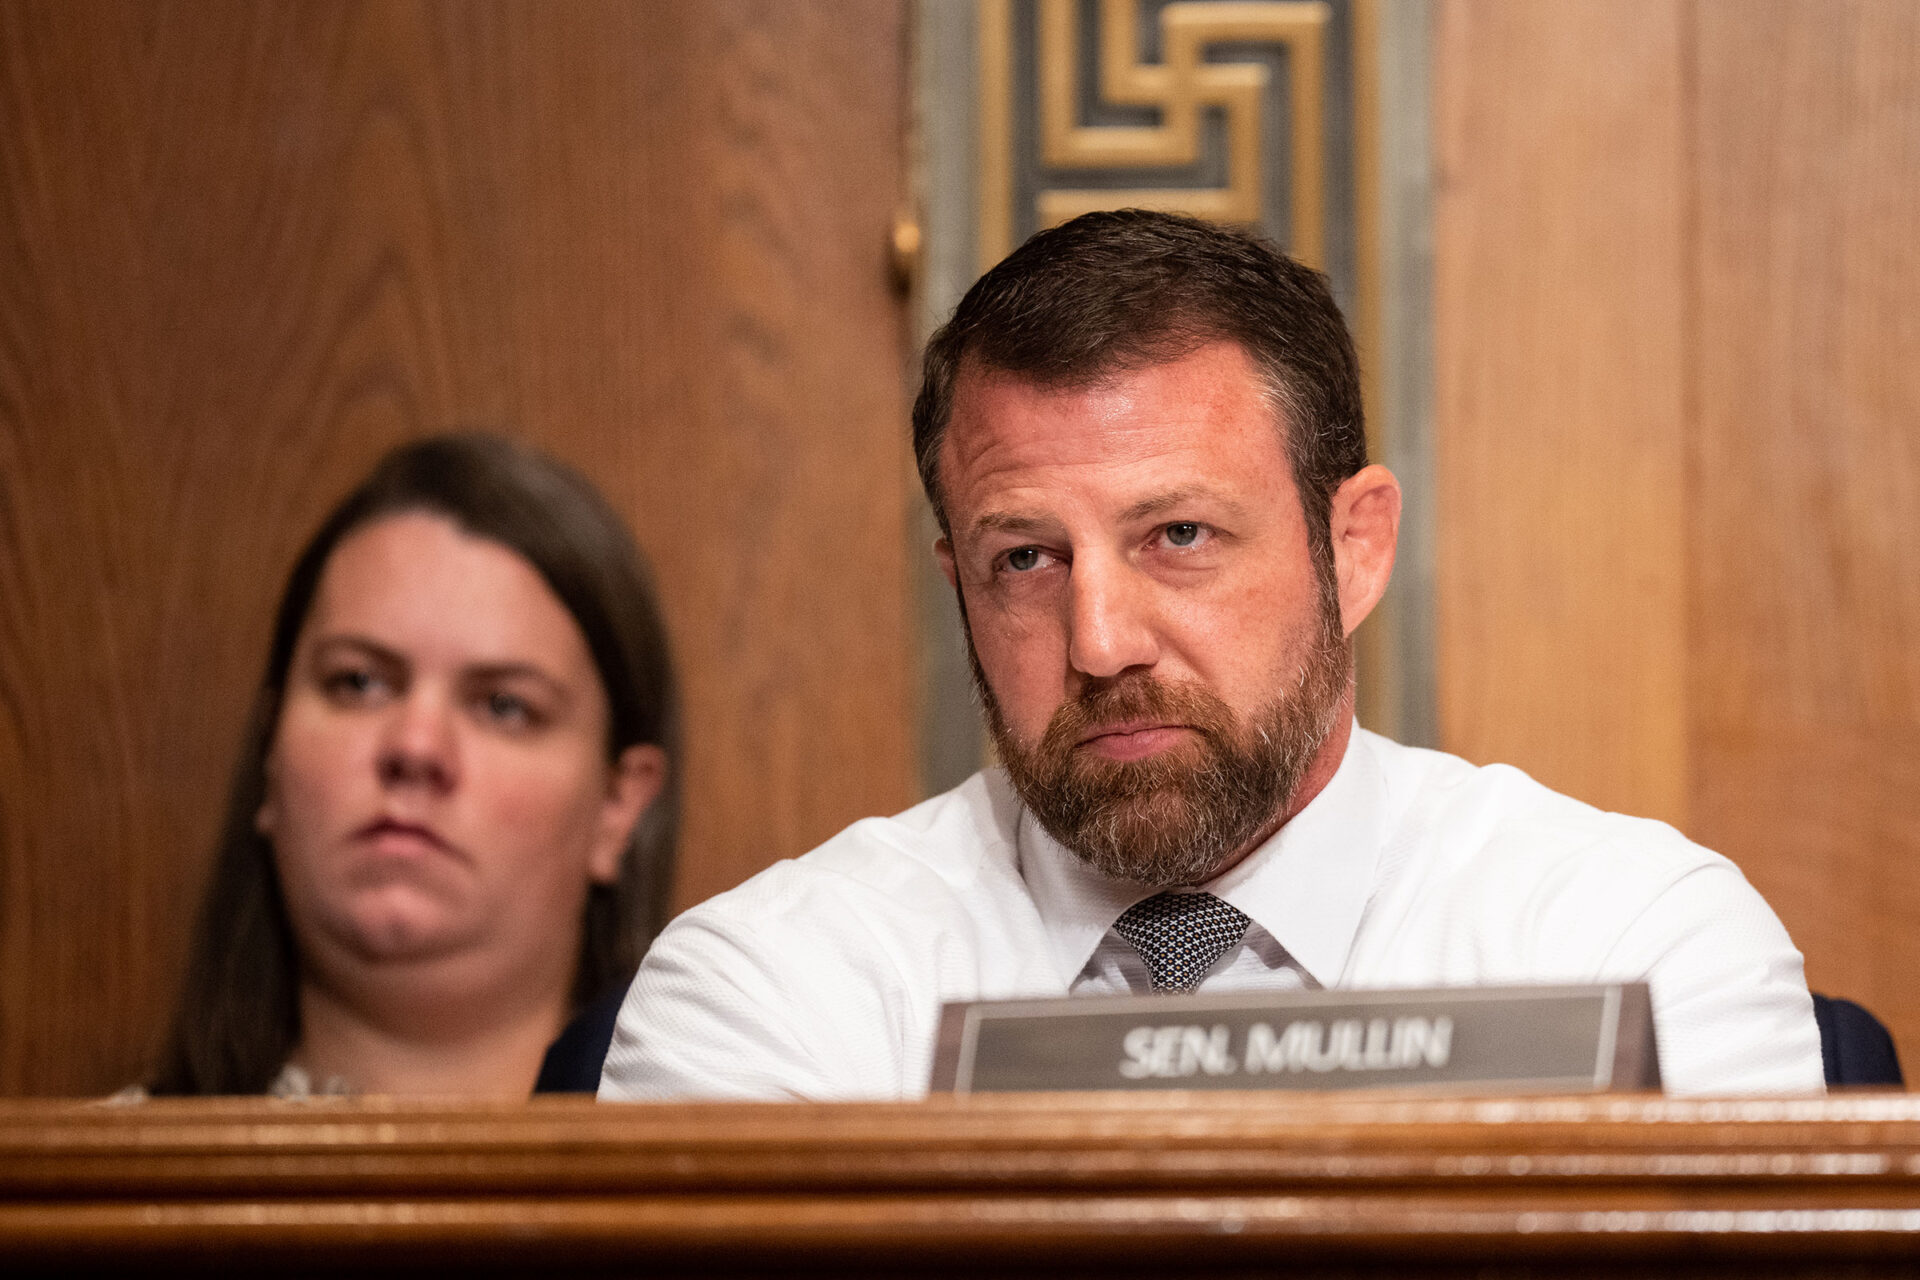 Sen. Markwayne Mullin listens during the Senate Health, Education, Labor and Pensions Committee hearing on "Standing Up Against Corporate Greed: How Unions are Improving the Lives of Working Families" on Tuesday, November 14, in the Dirksen Senate Office Building.